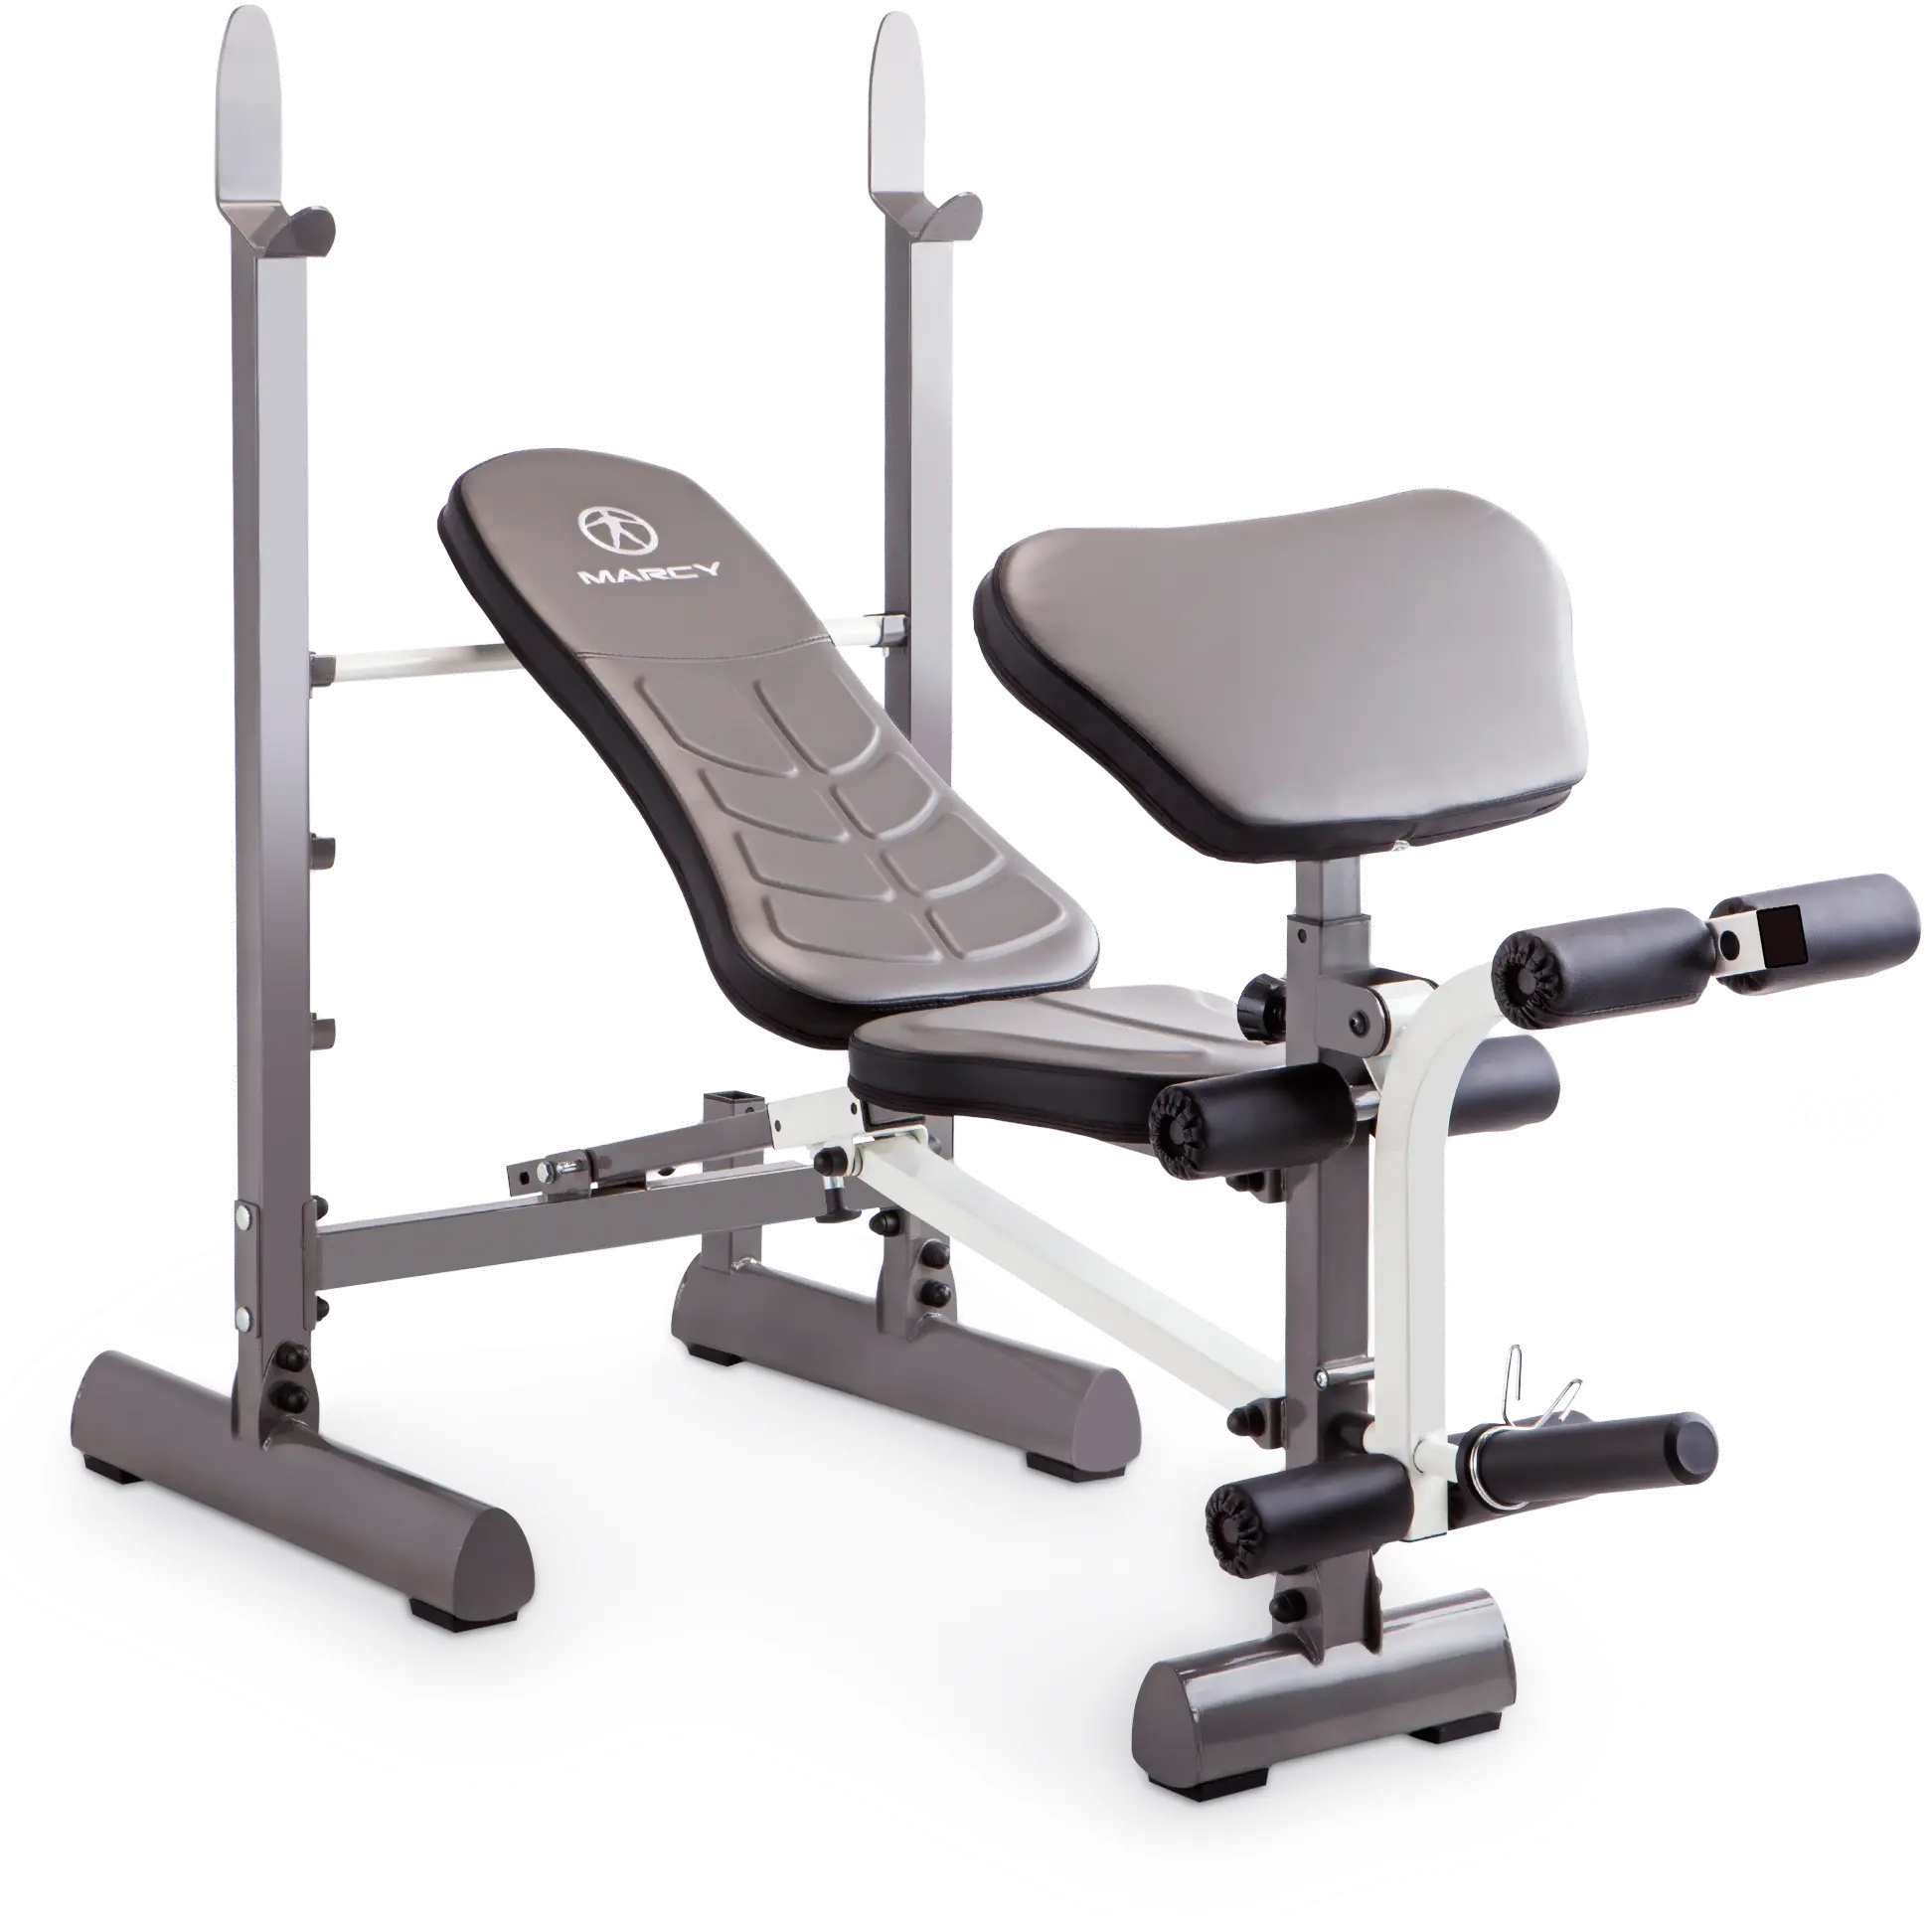 Photos - Weight Bench Marcy Impex Inc  Black Folding  MWB-20100 